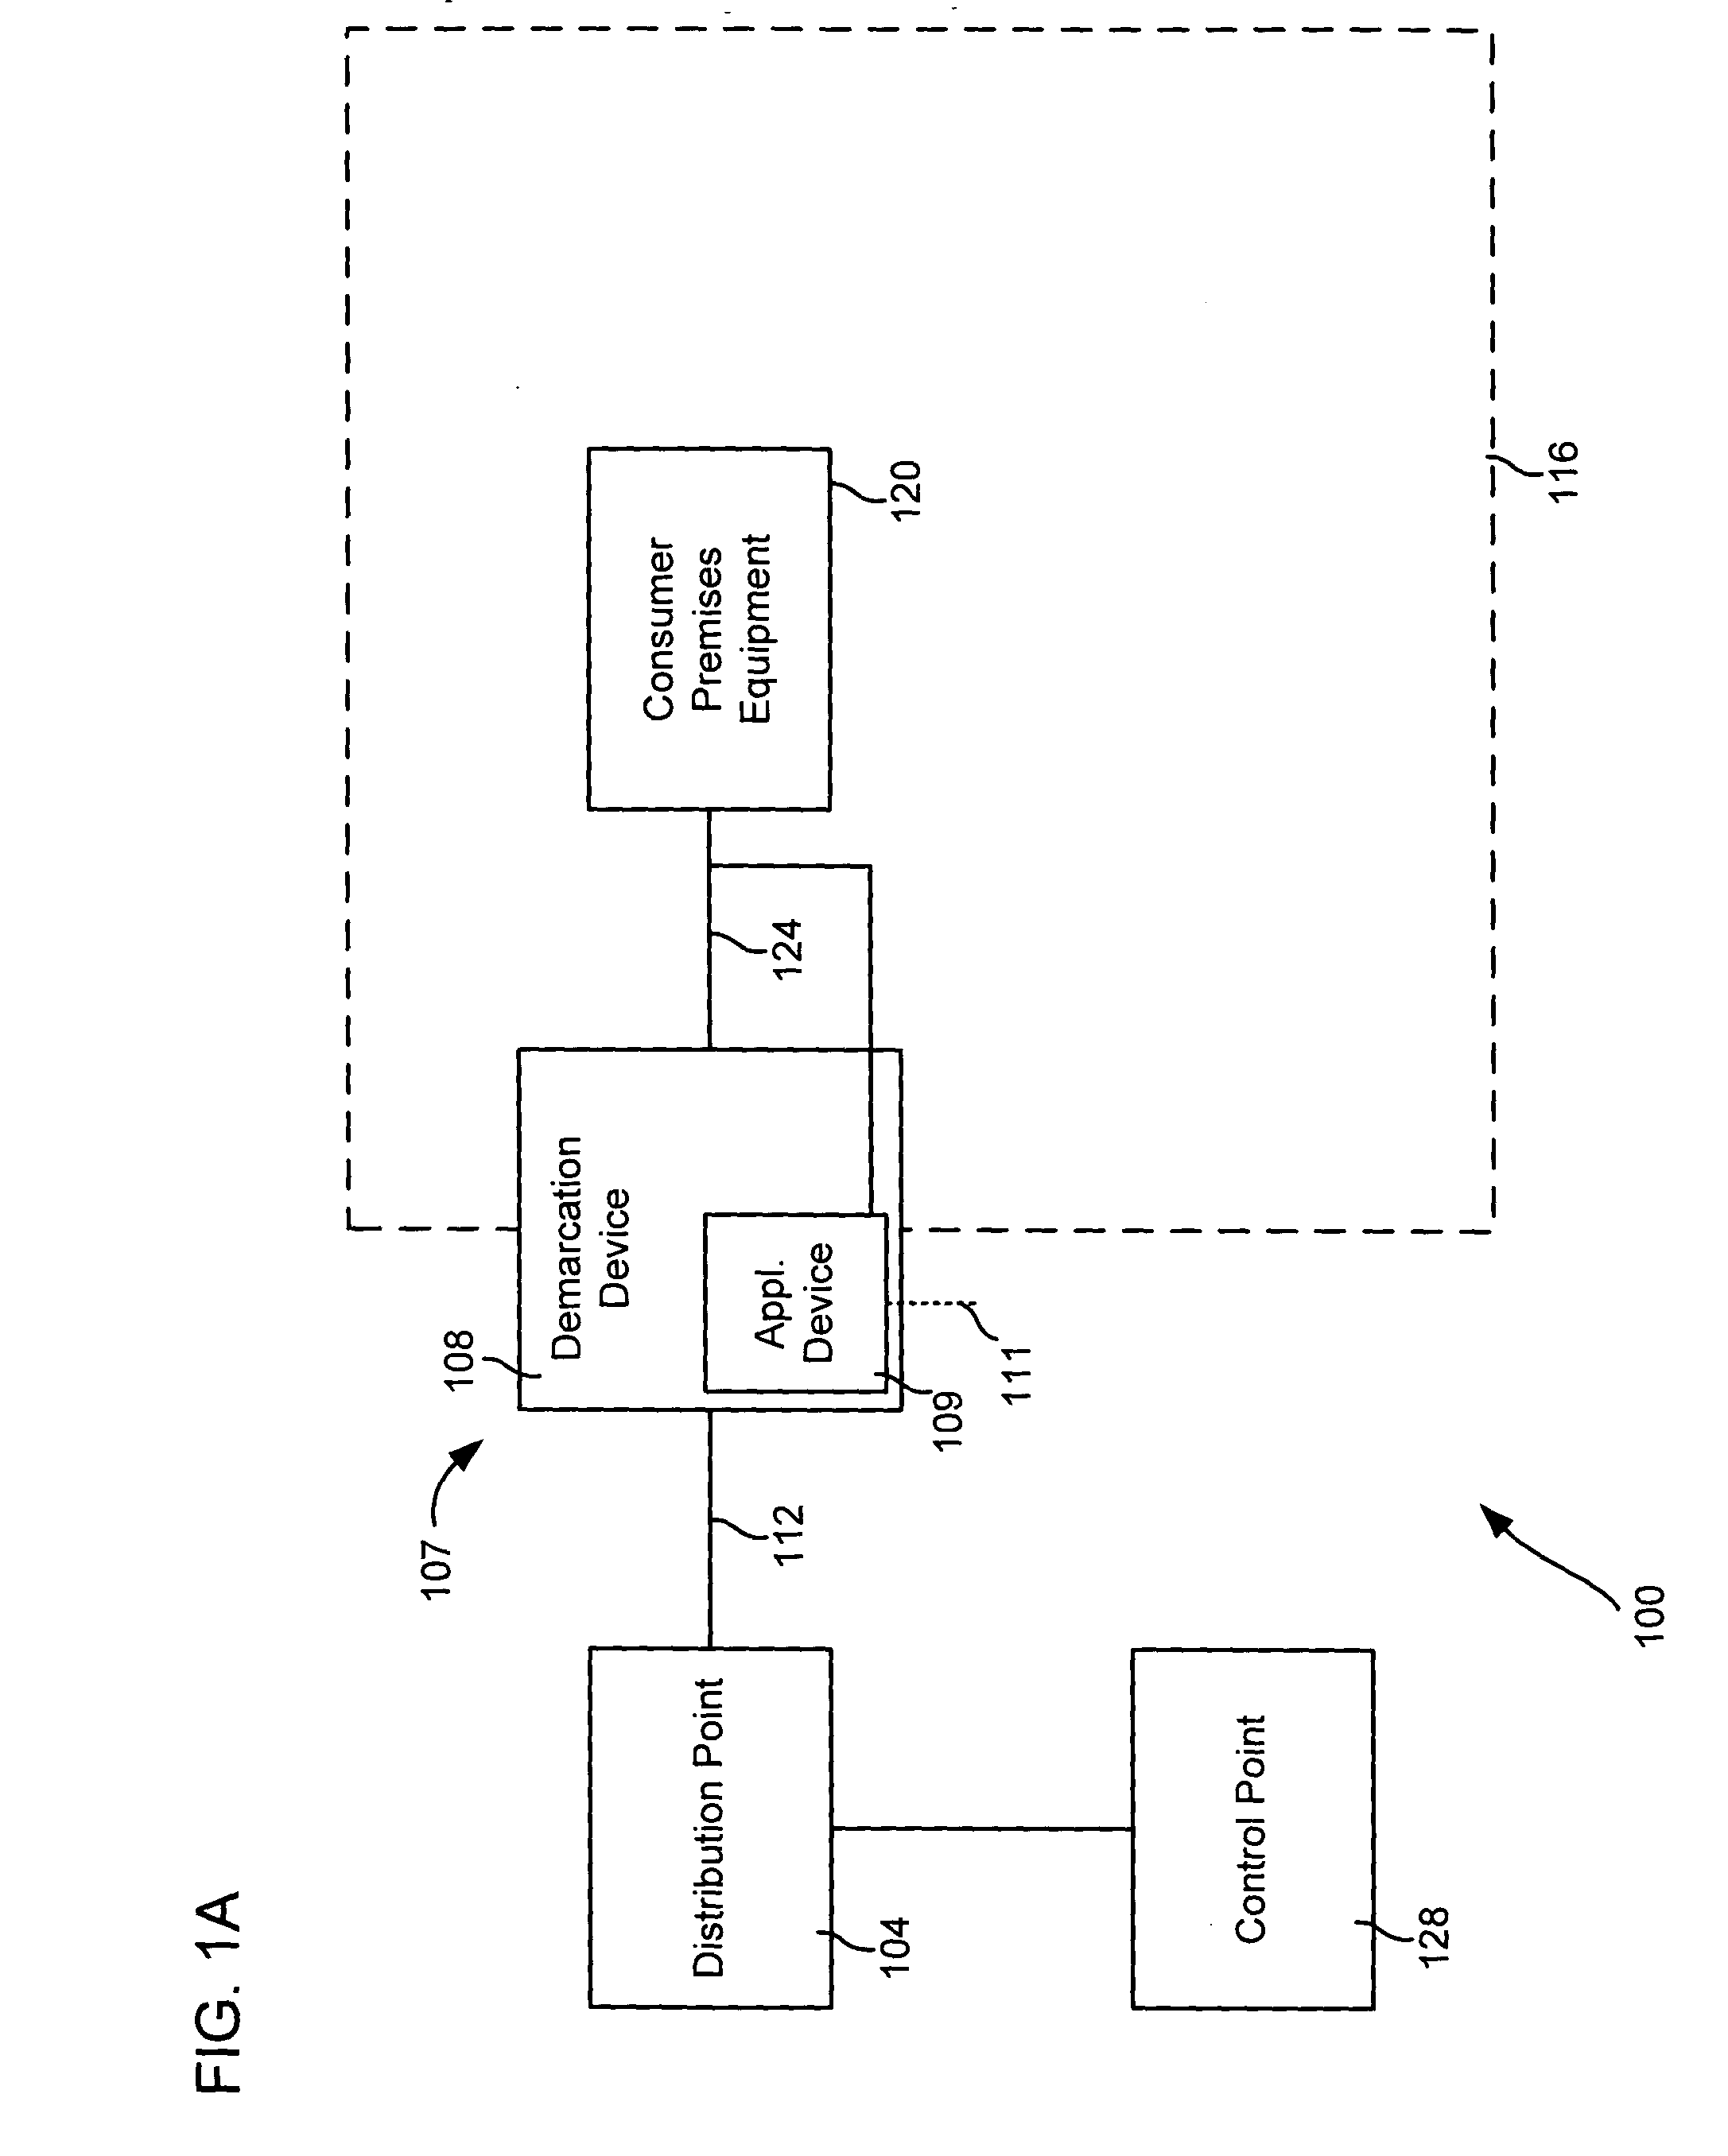 Systems and methods for delivering picture-in-picture signals at diverse compressions and bandwidths